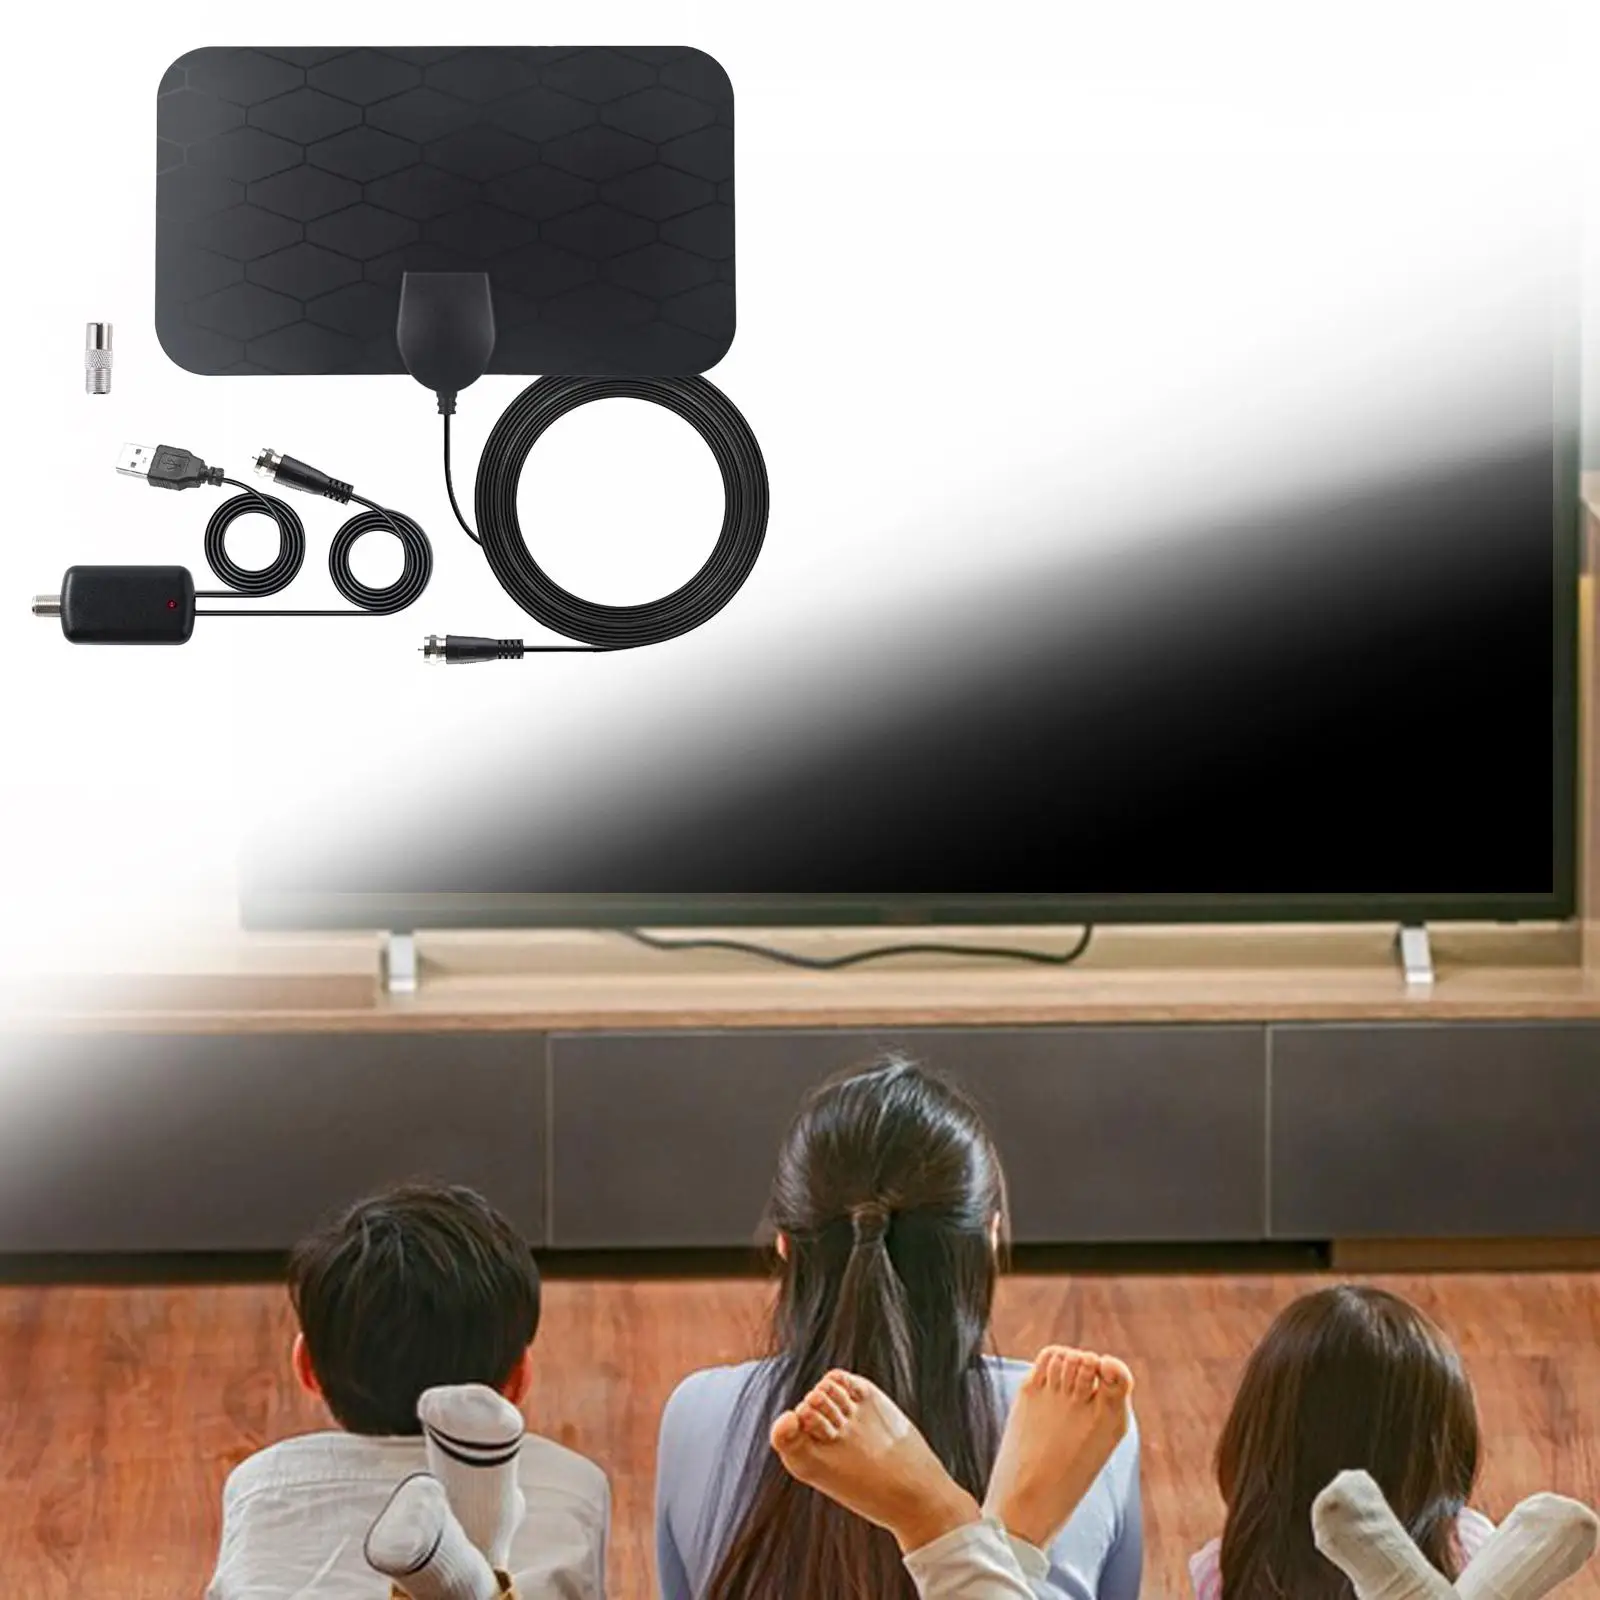  Digital Indoor Amplified TV Antenna W/ Free View Television Local Channels Smart HDTV Antenna